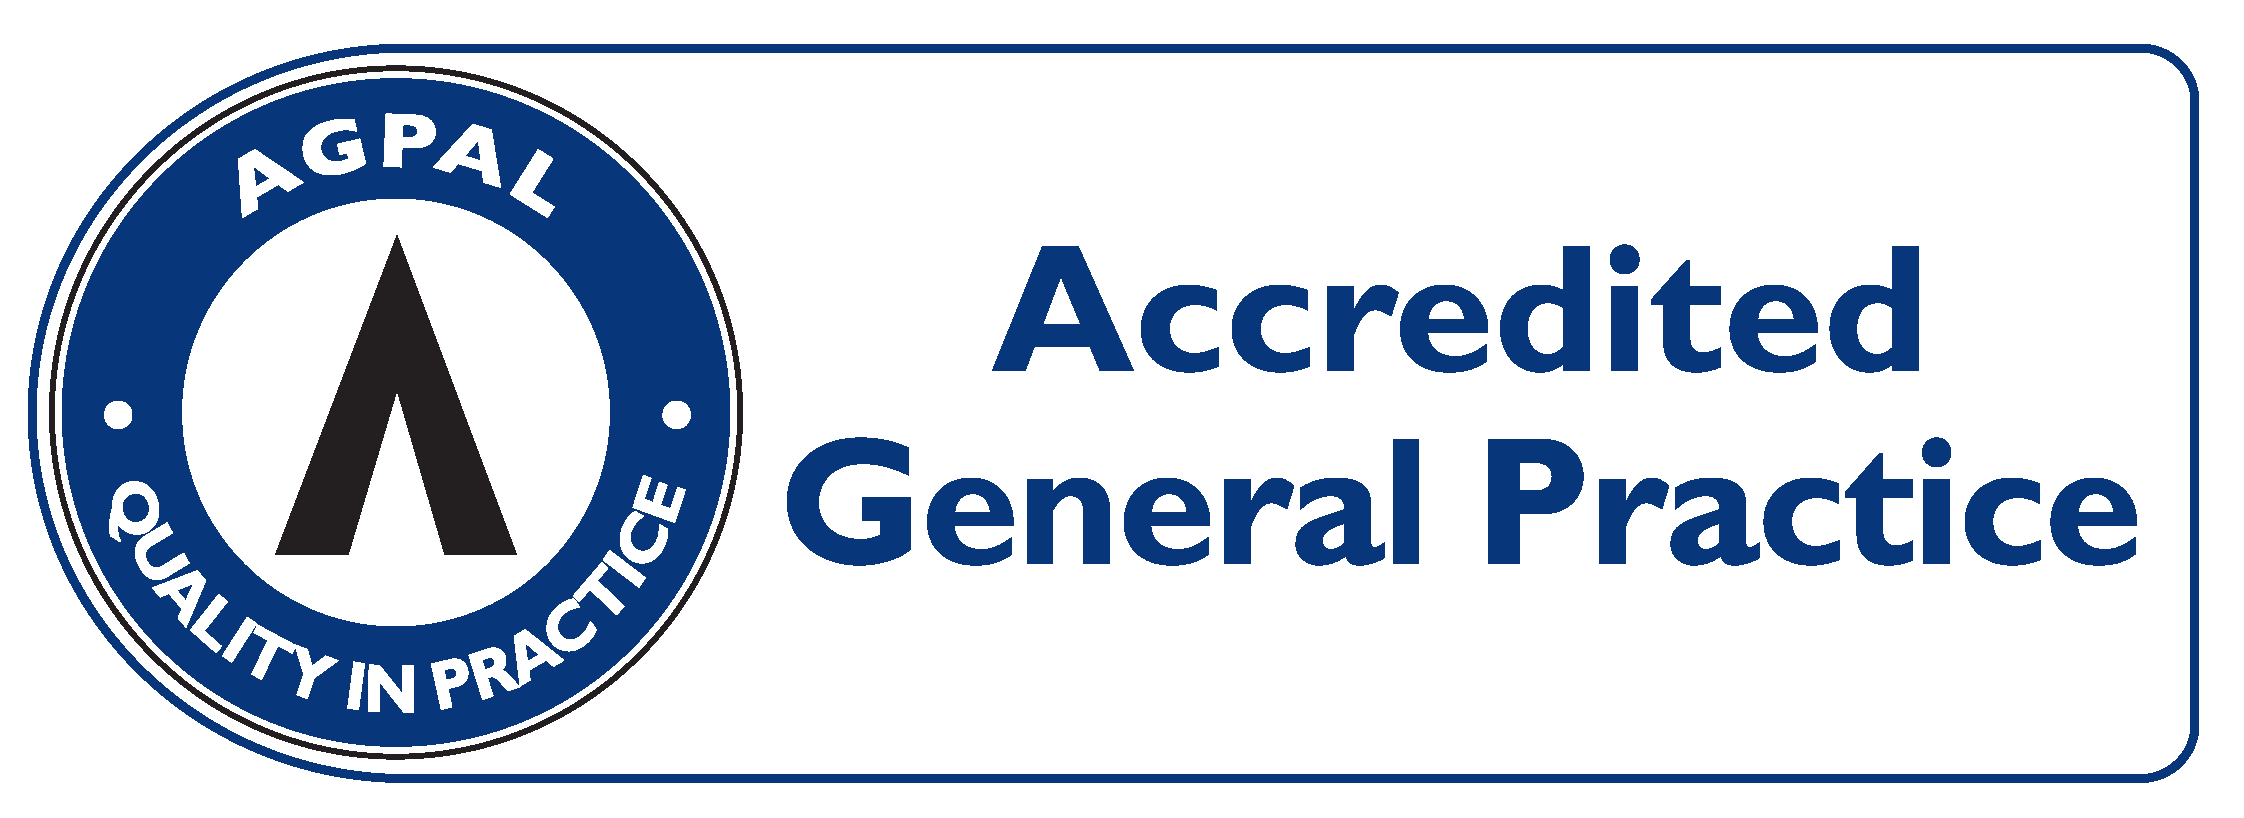 AGPAL - General Practice Accredited Symbol - PNG